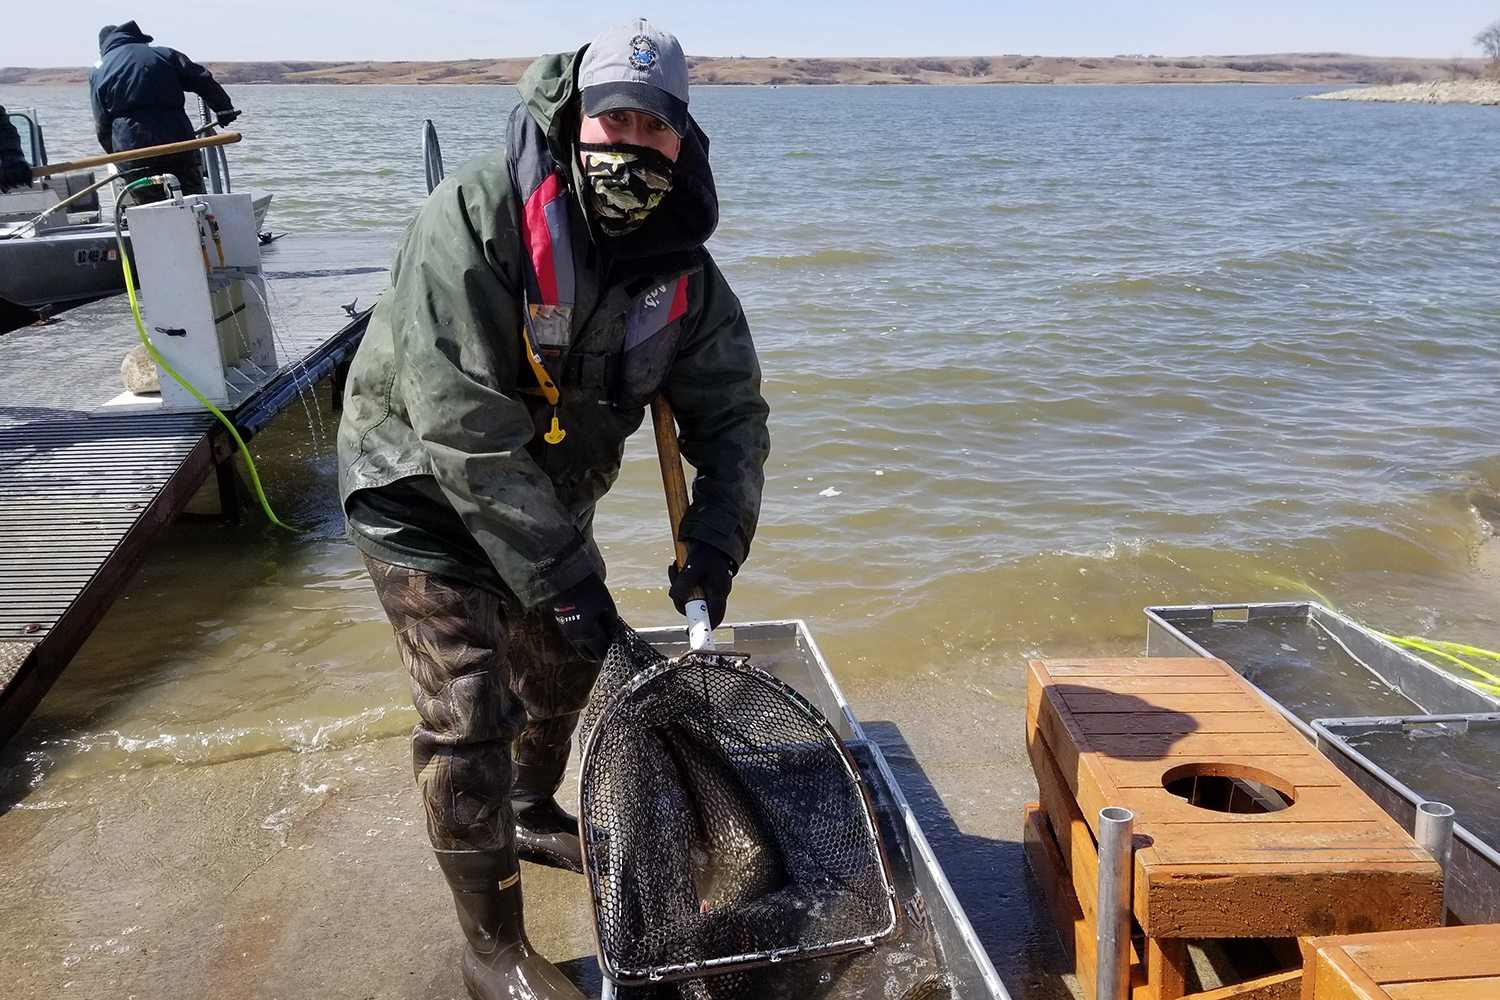 Fisheries staff wearing face mask while working